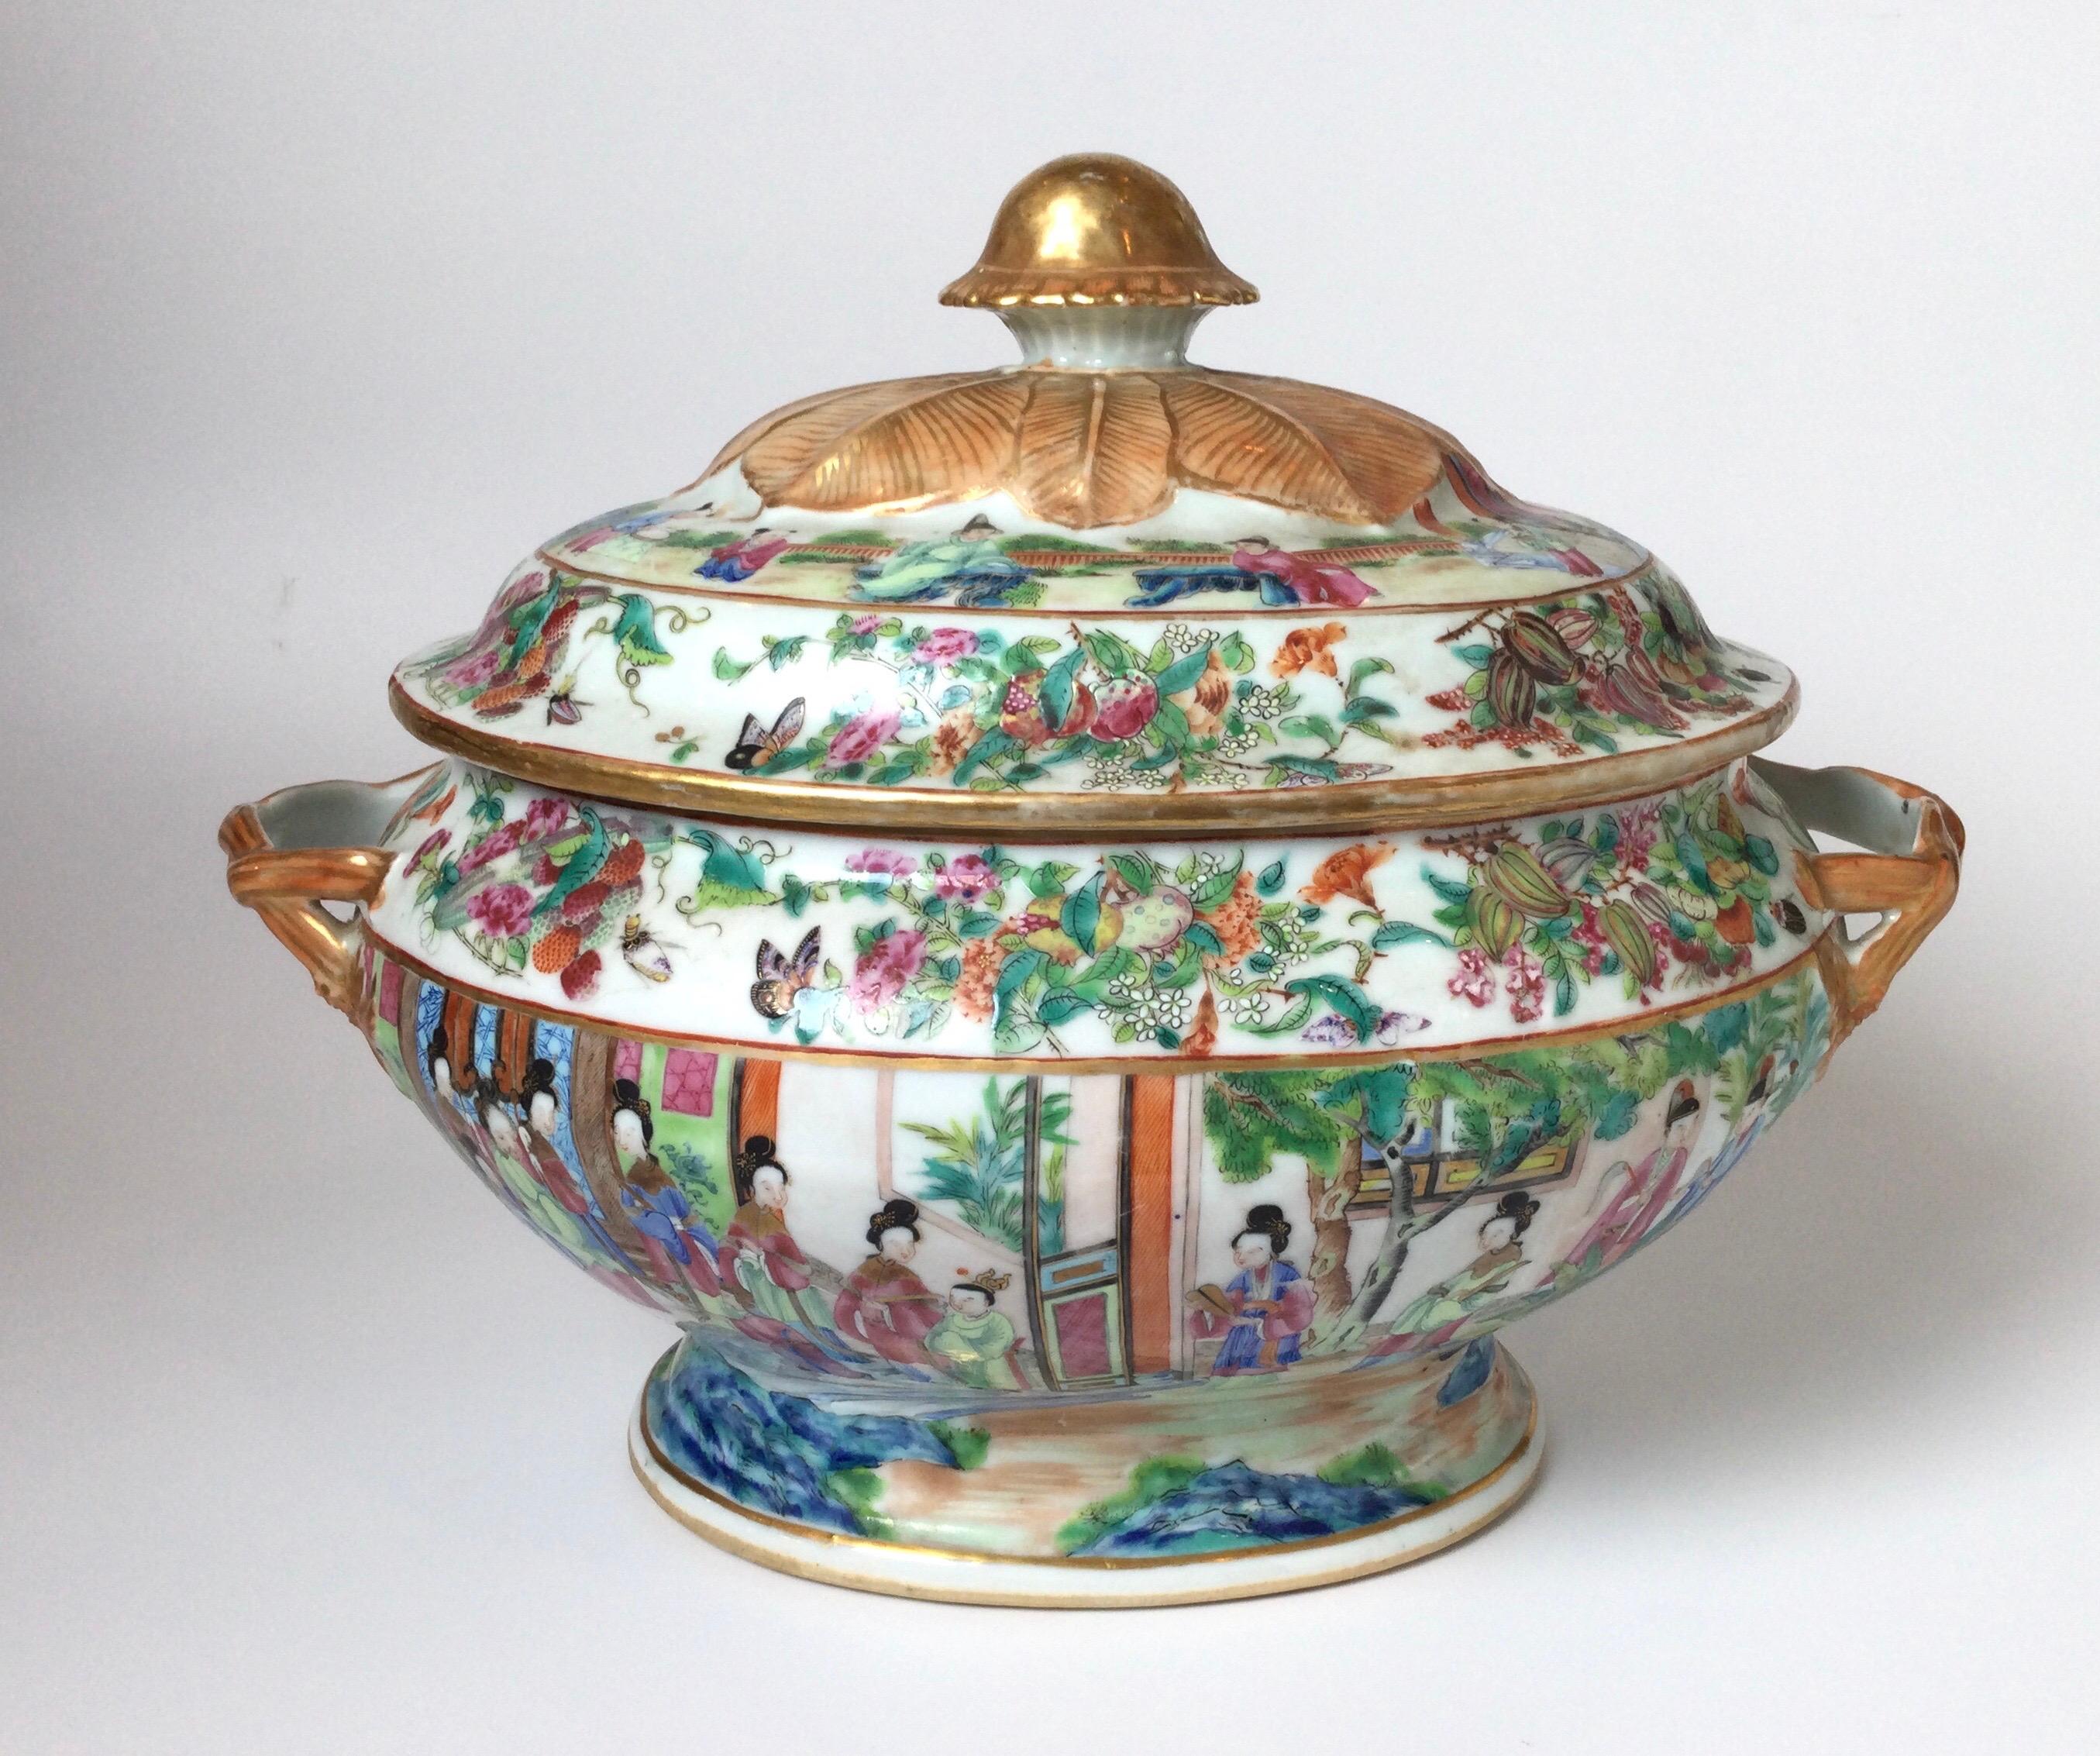 Porcelain Mid 19th Century Chines Export Large Pedestal Tureen